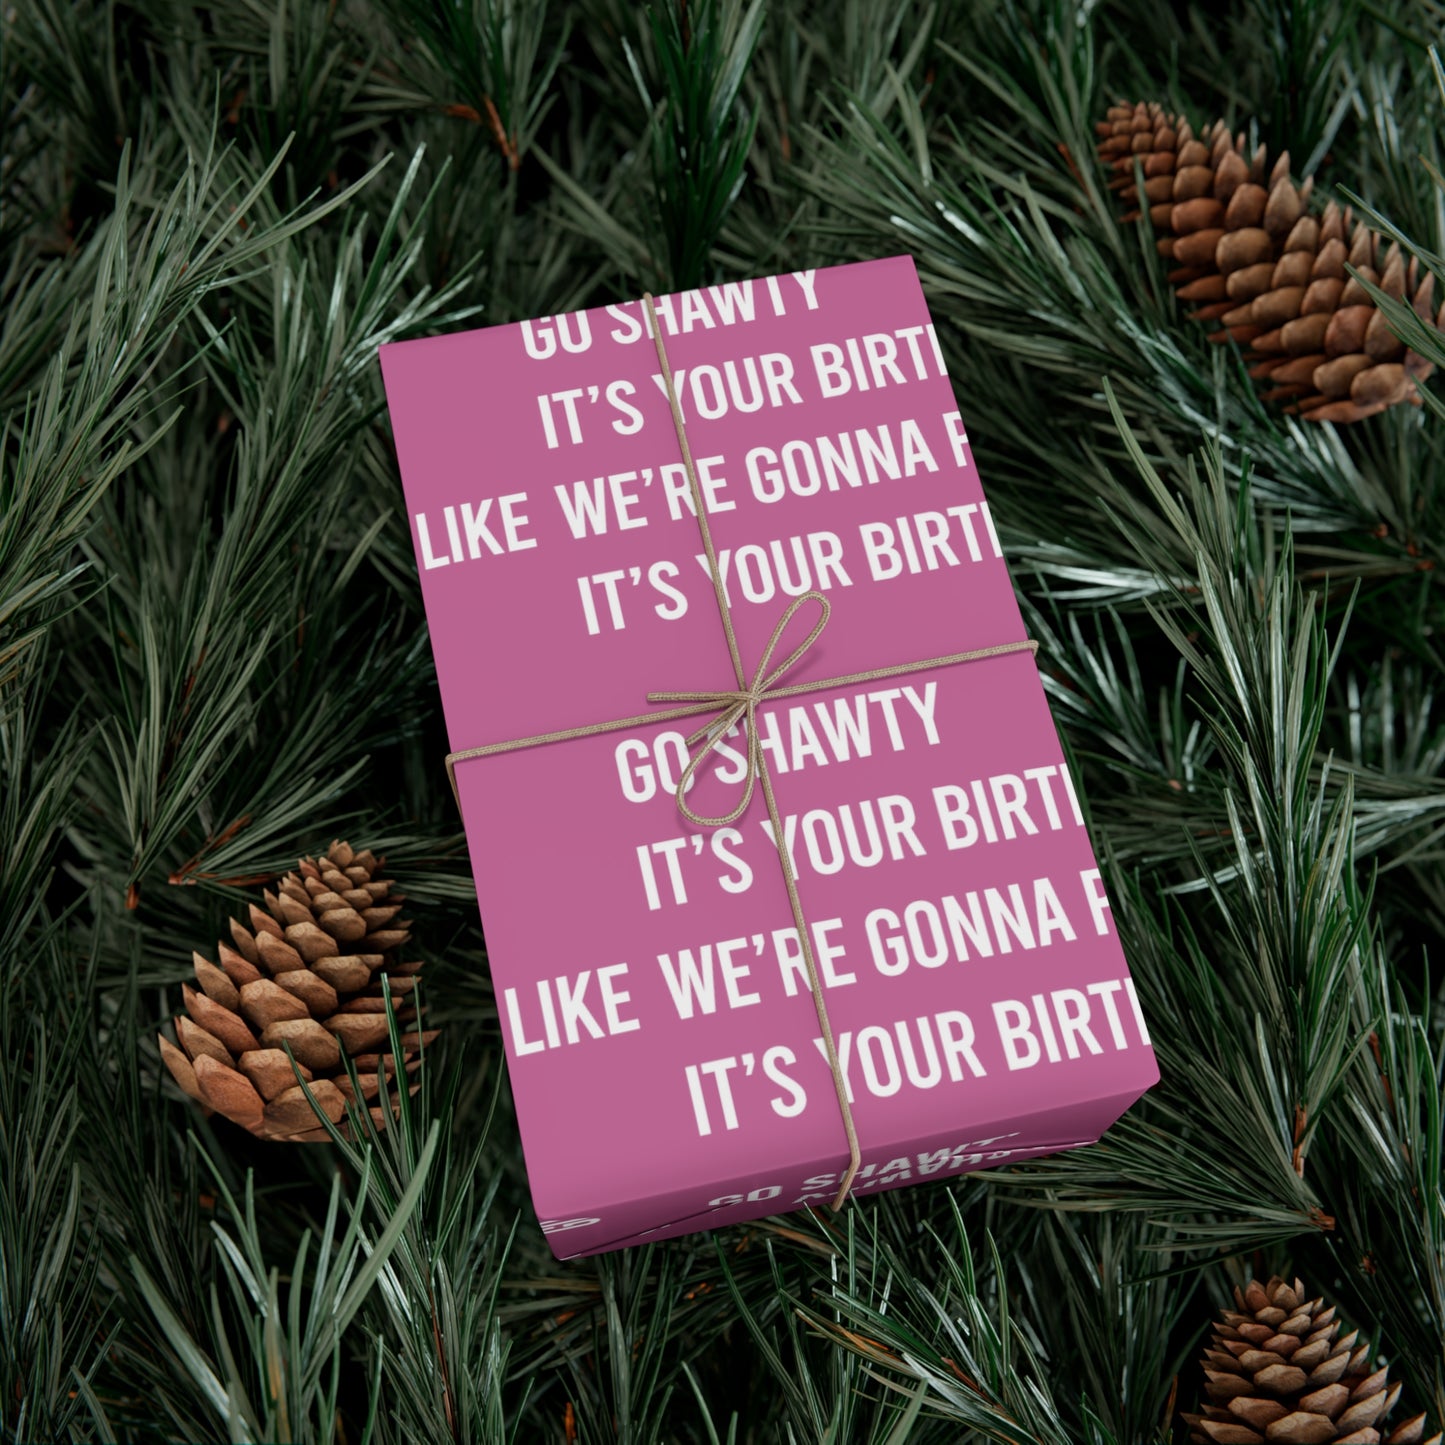 Rapping Paper - "Go Shawty It's Your Birthday"